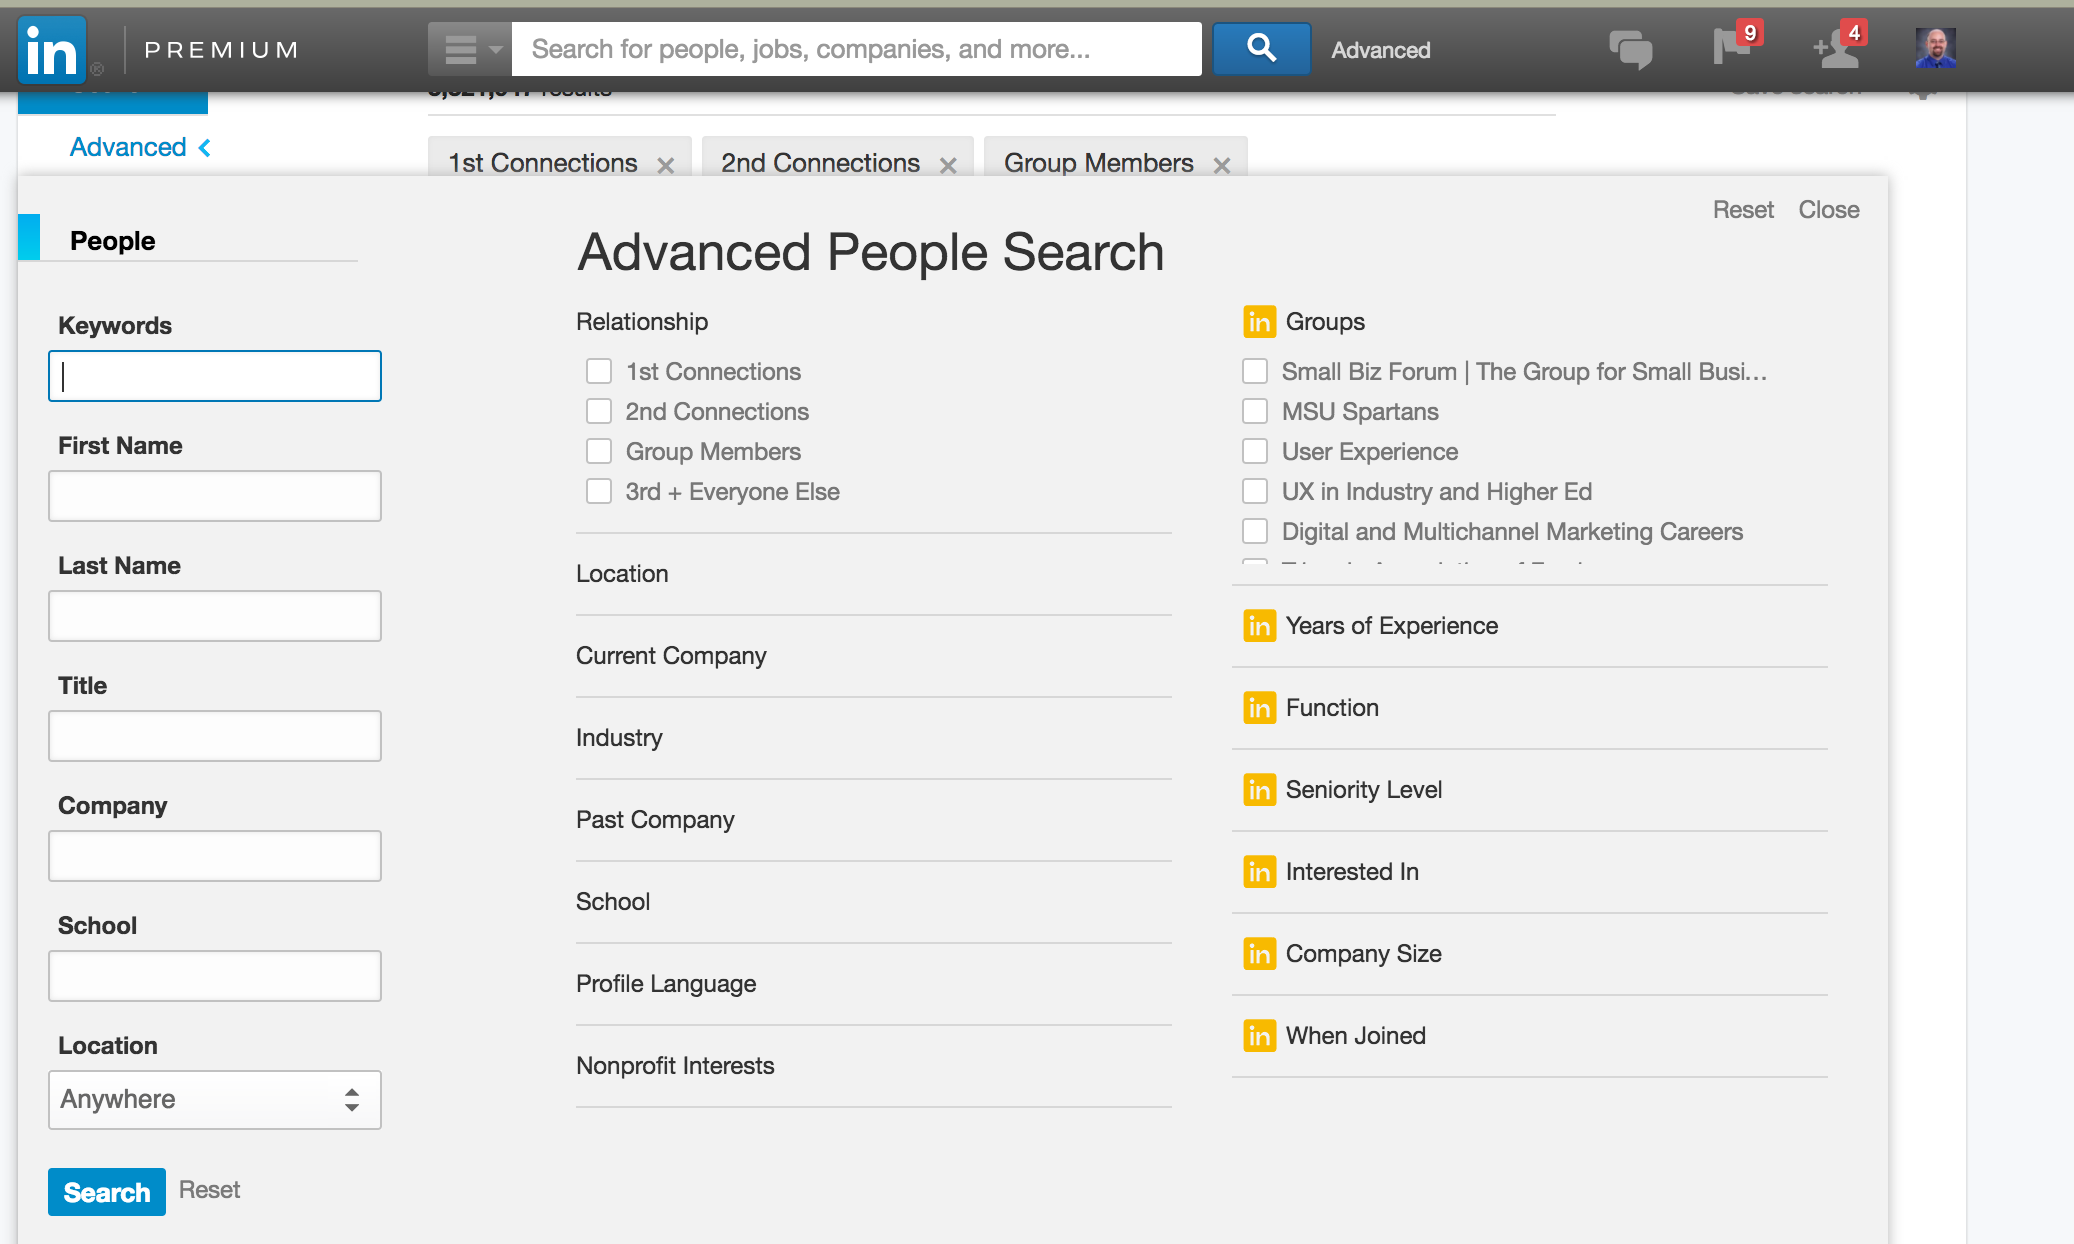 A screenshot of the LinkedIn advanced search interface, published to "3 Tips for LinkedIn Marketing for Small Businesses and Non-Profits"